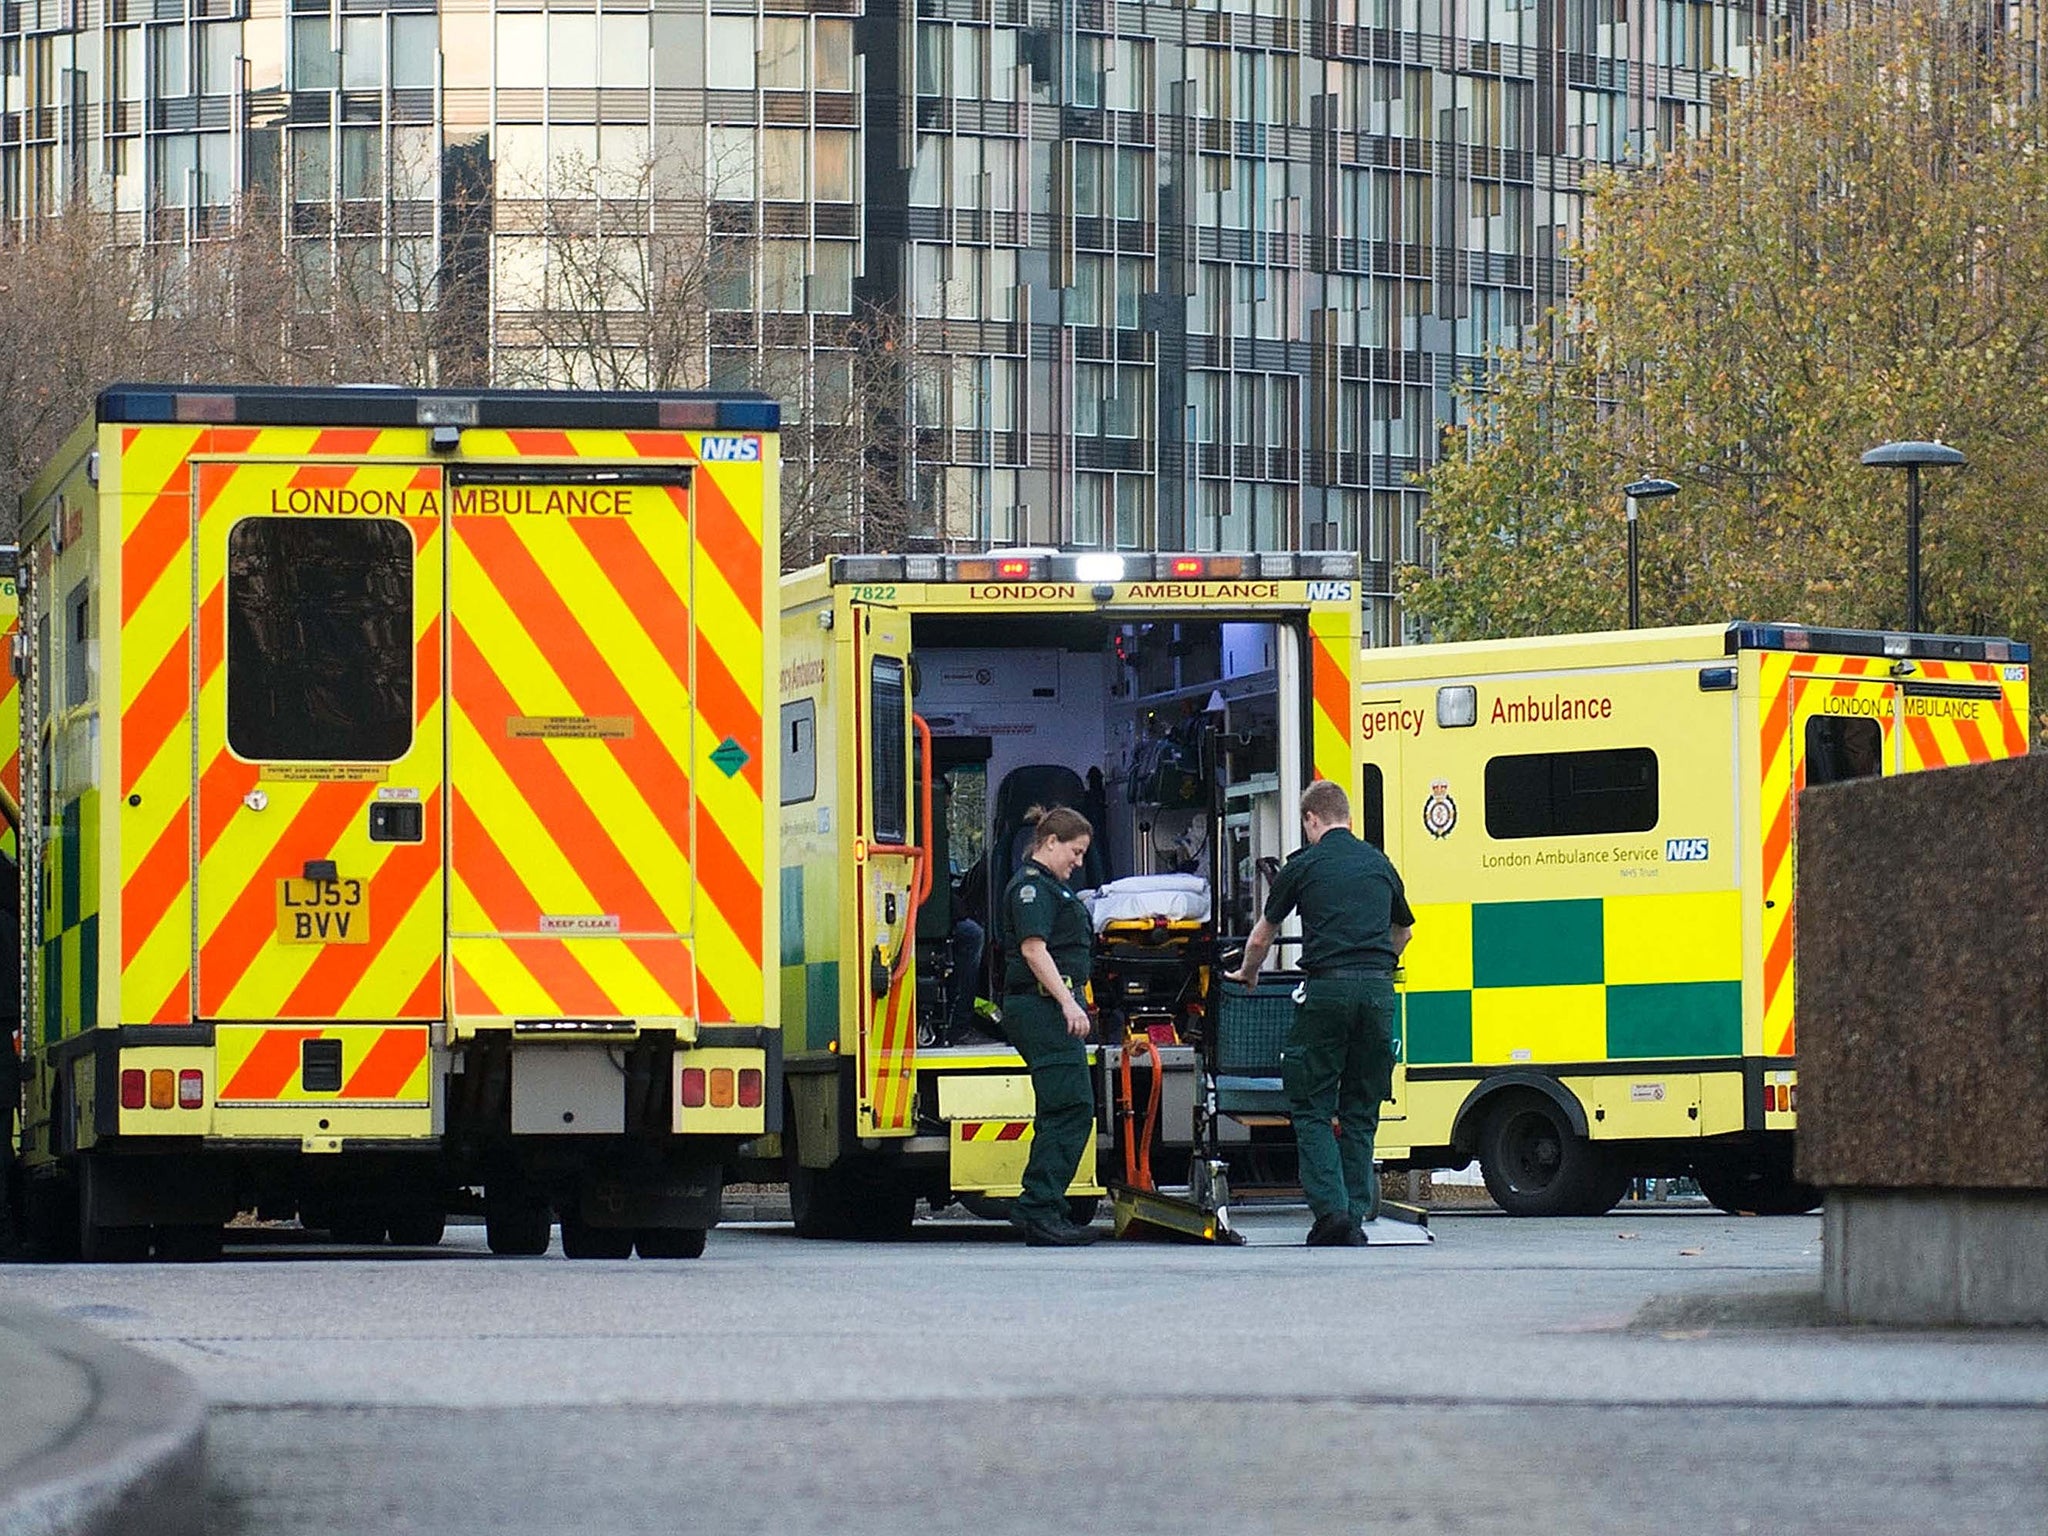 Hospitals have been dealing with record levels of emergency admissions in the past few weeks